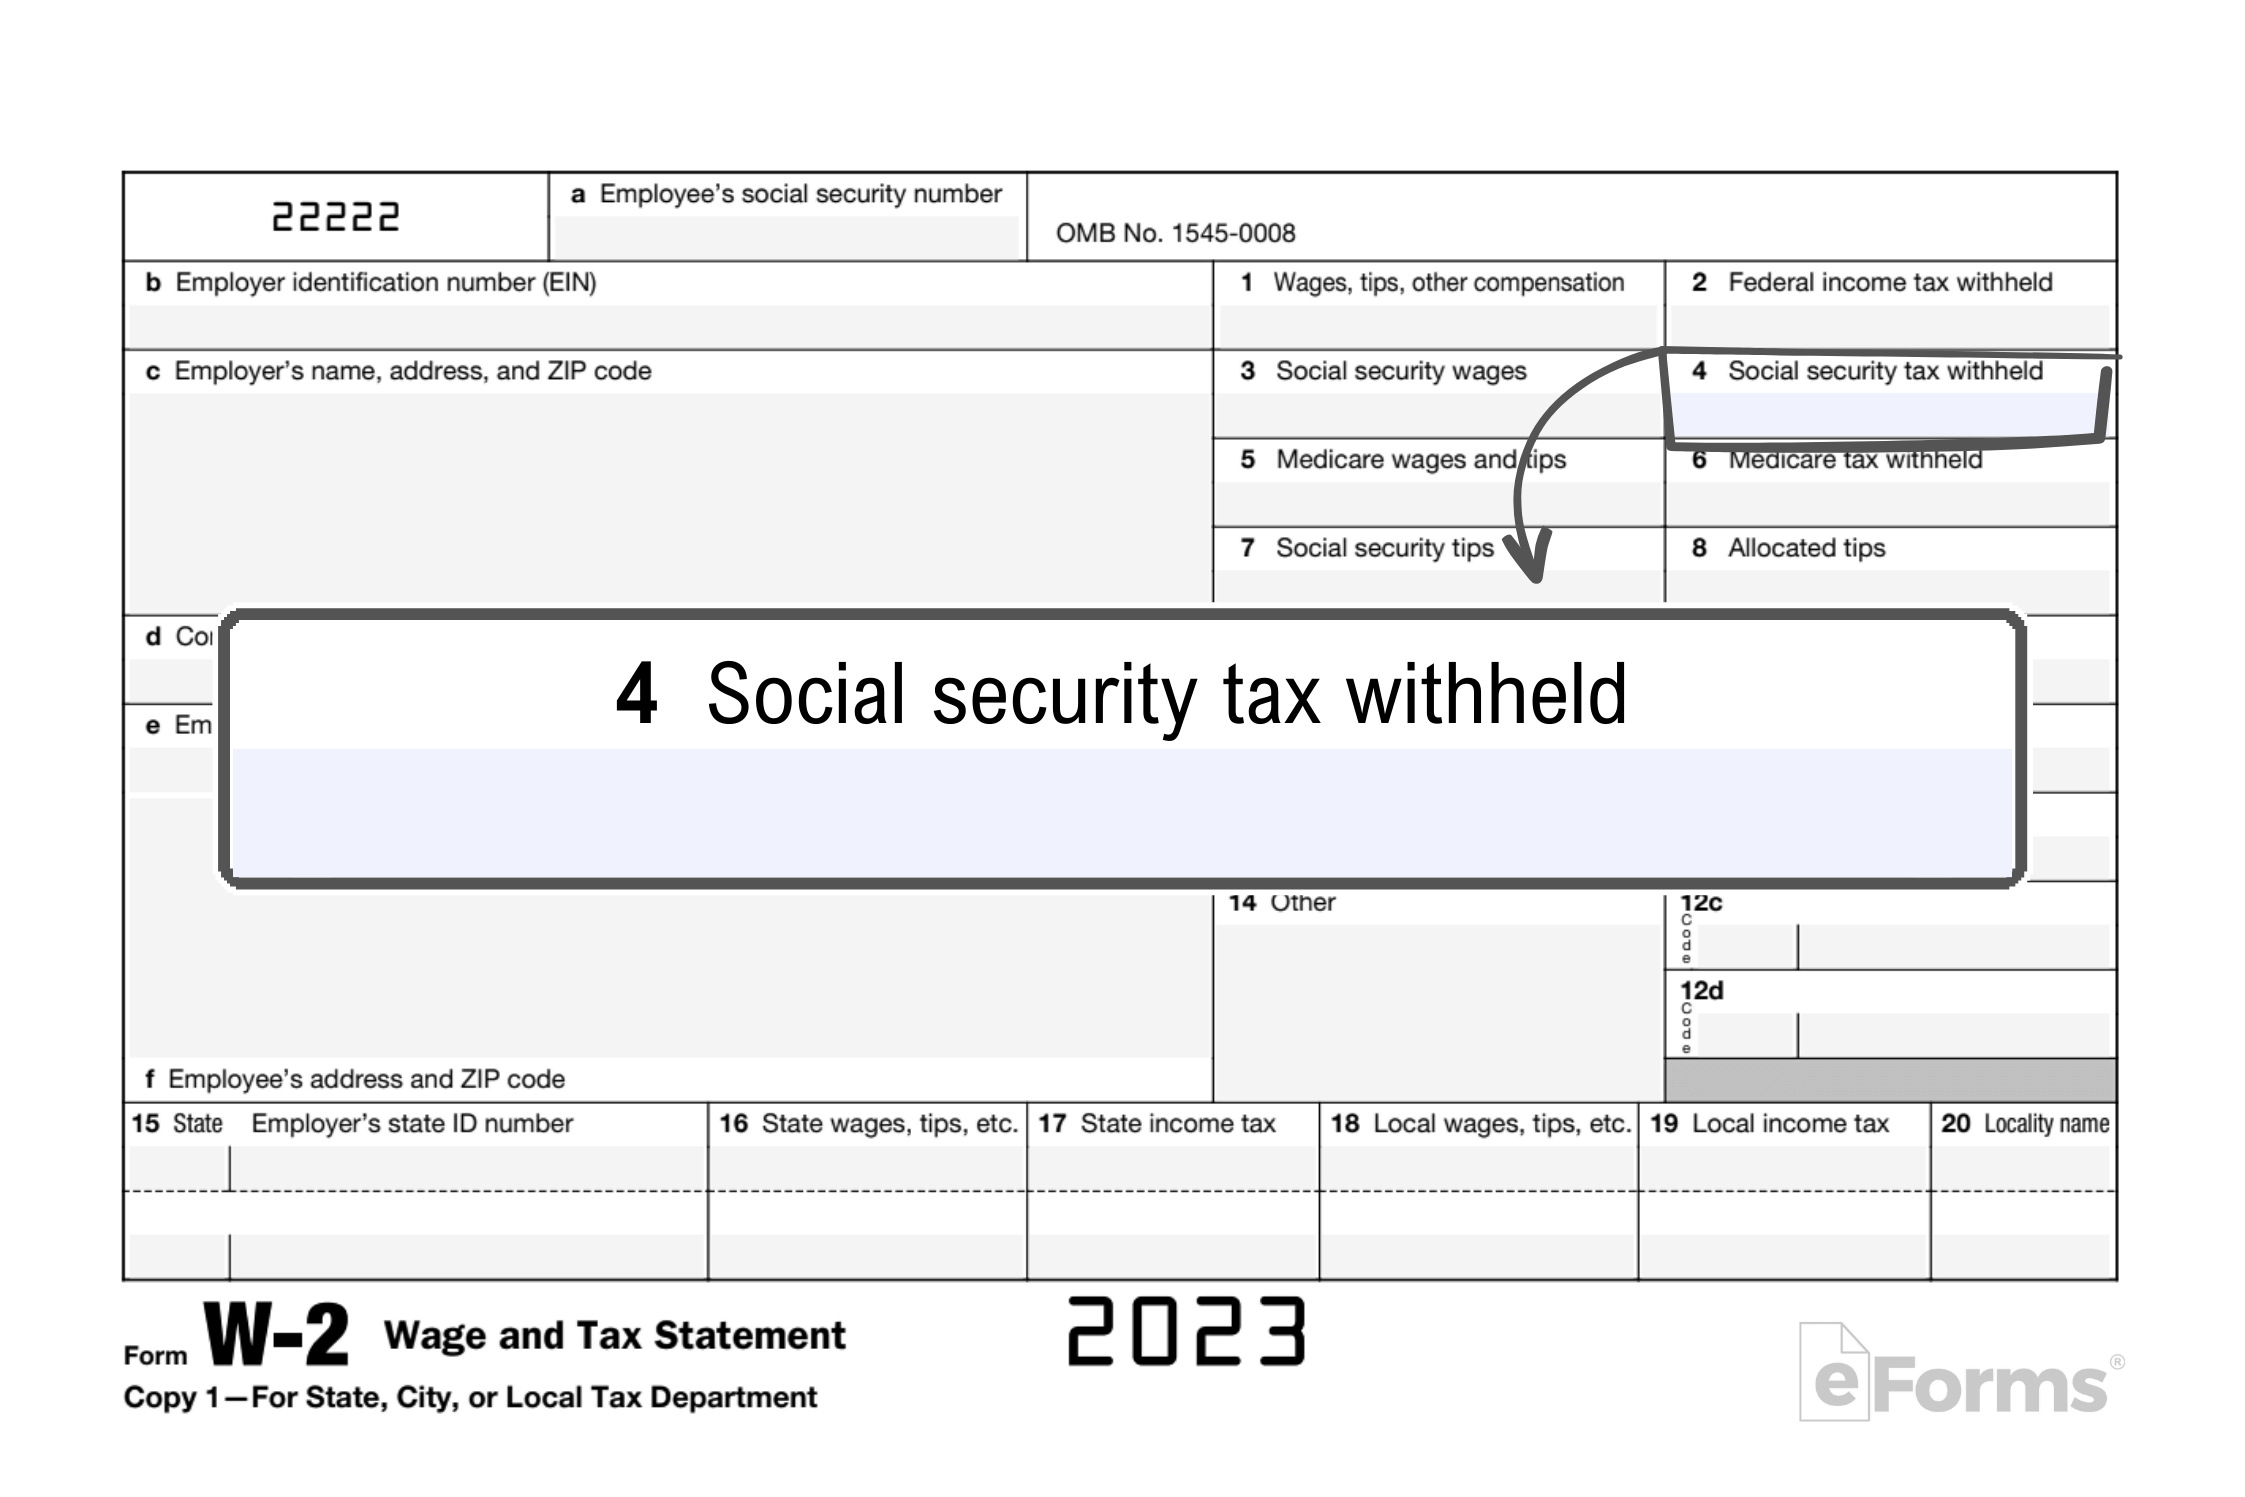 Social security tax witheld